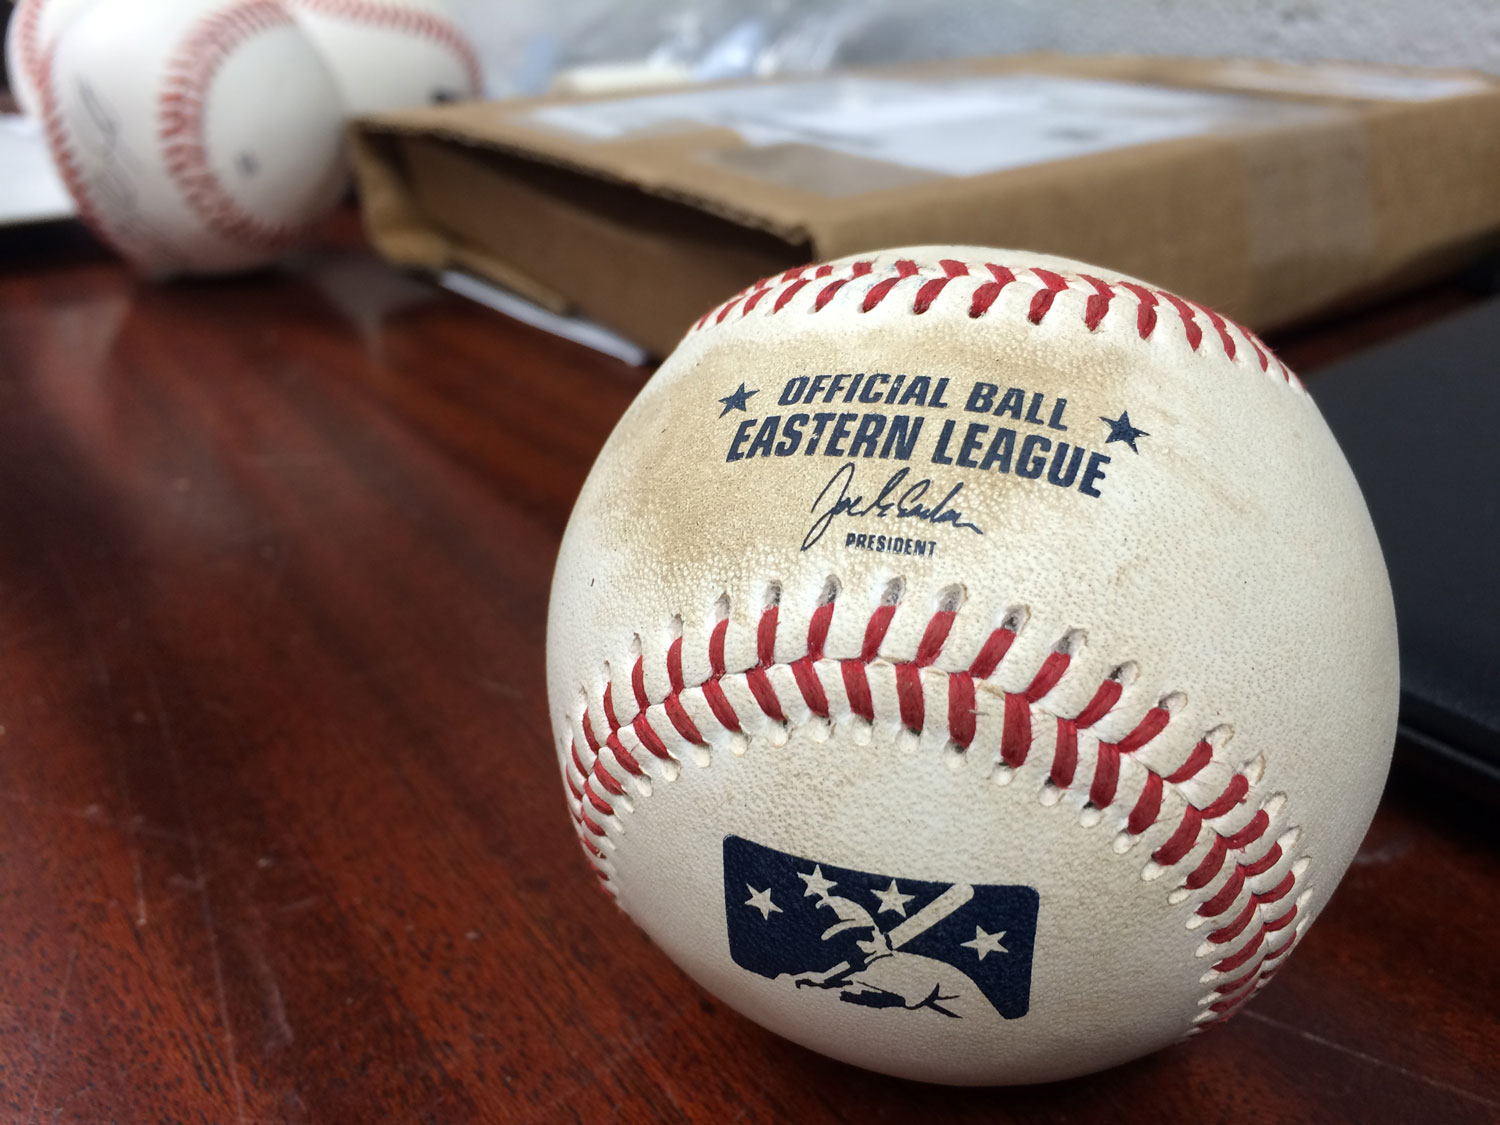 A defective ball stains on the label. Rose says about one ball in a thousand will do this. (WTOP/Noah Frank)